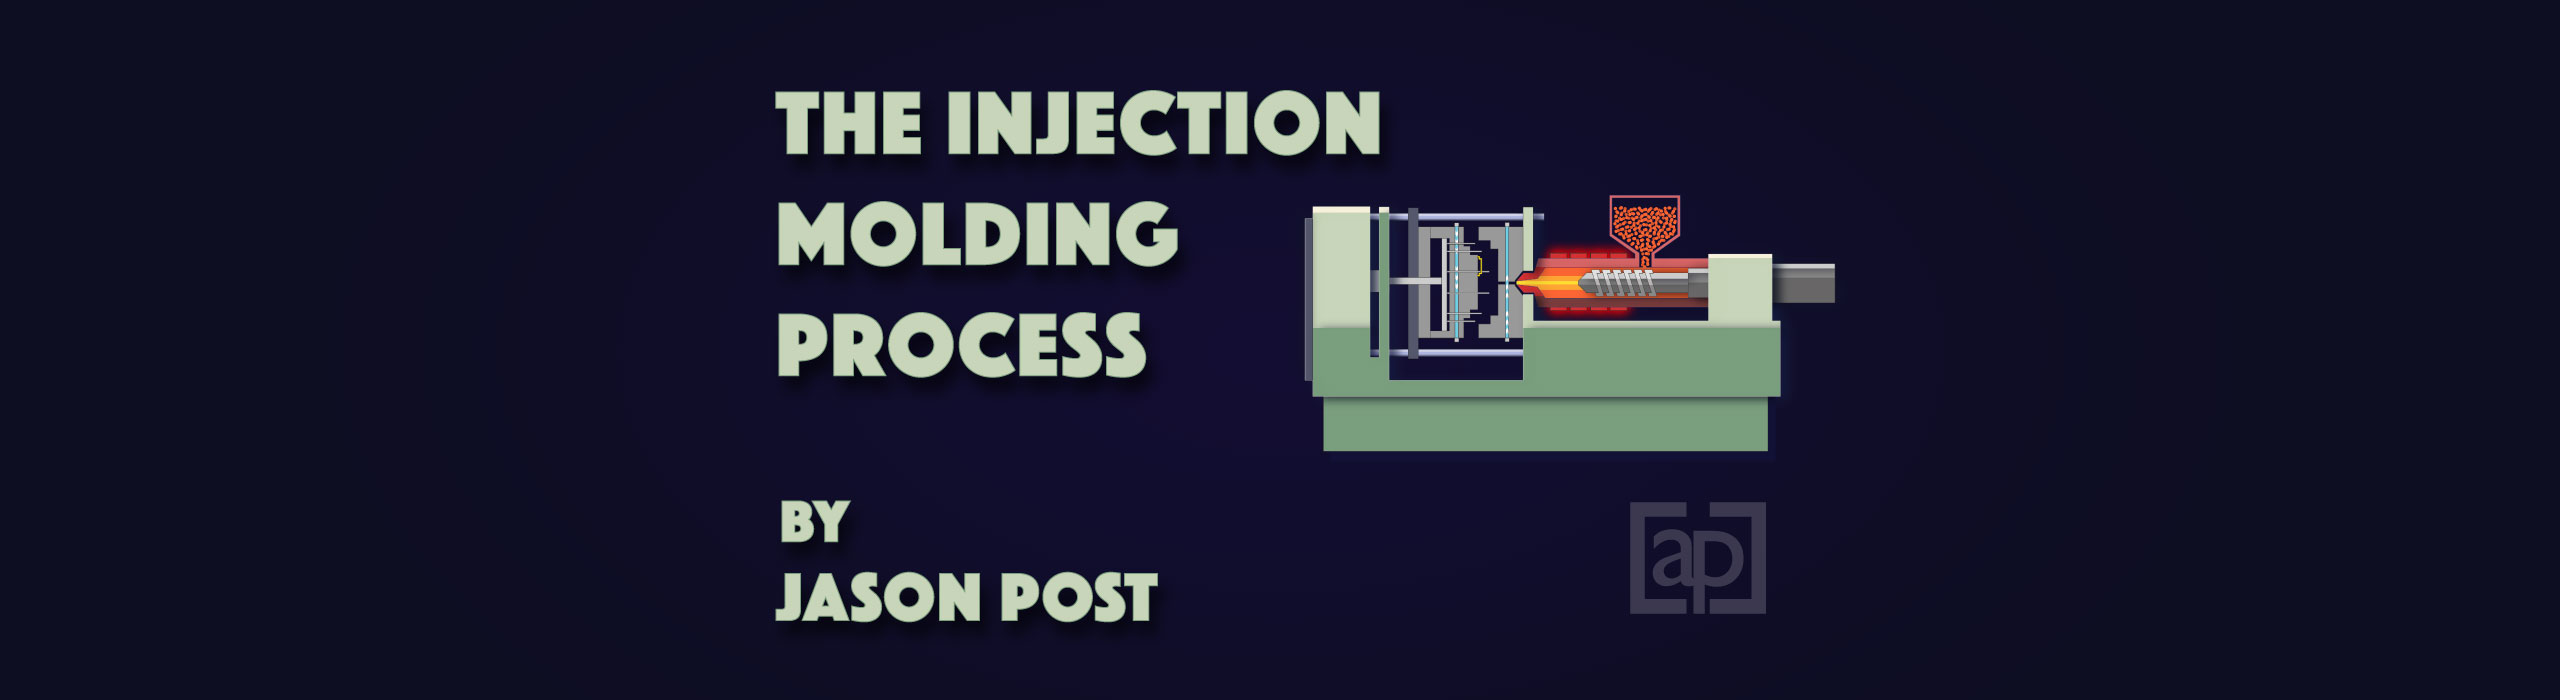 Injection Molding Process_1